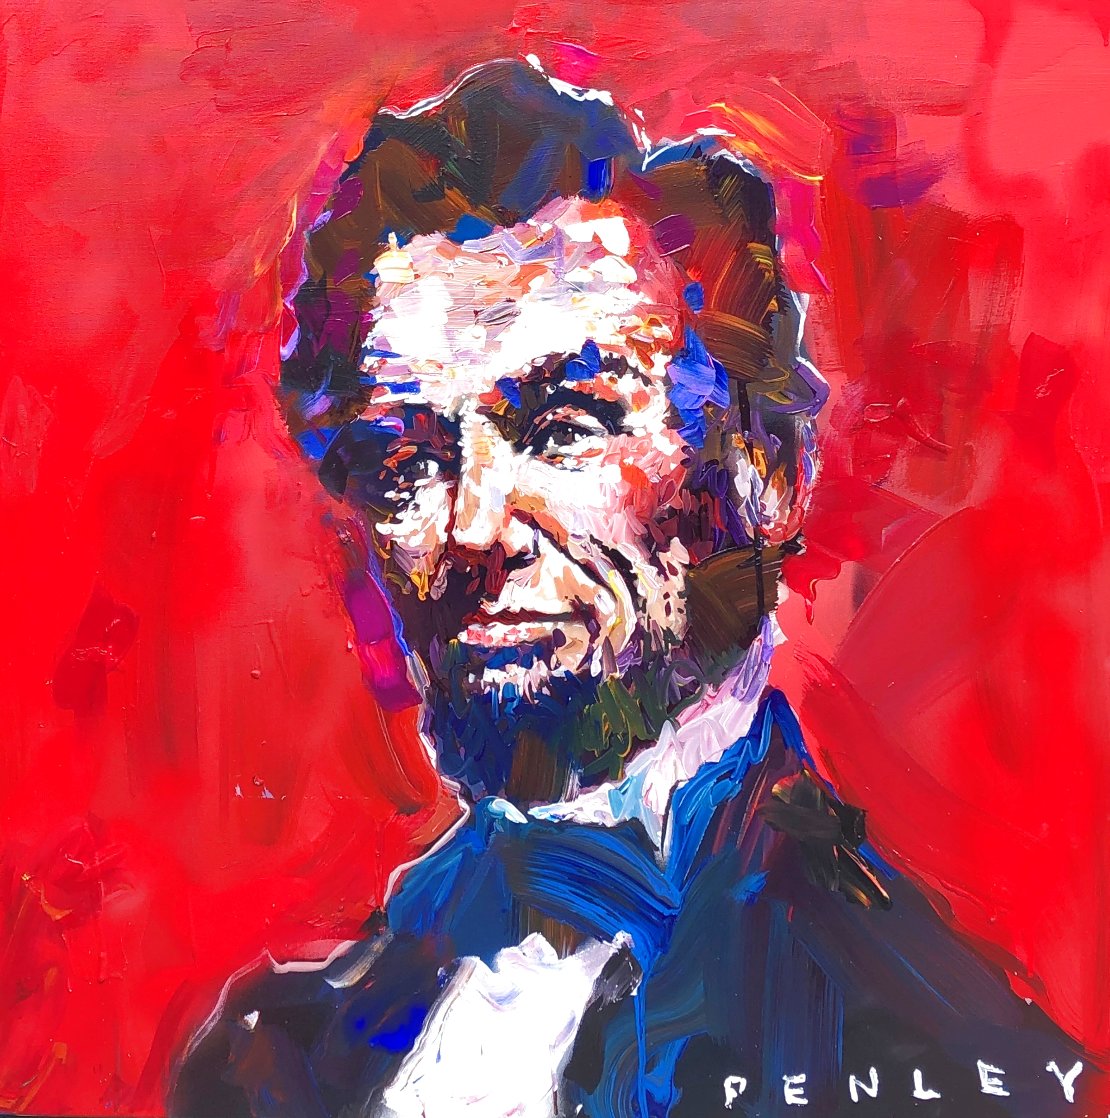 Abraham Lincoln 2019 42x42 Original Painting by Steve Penley